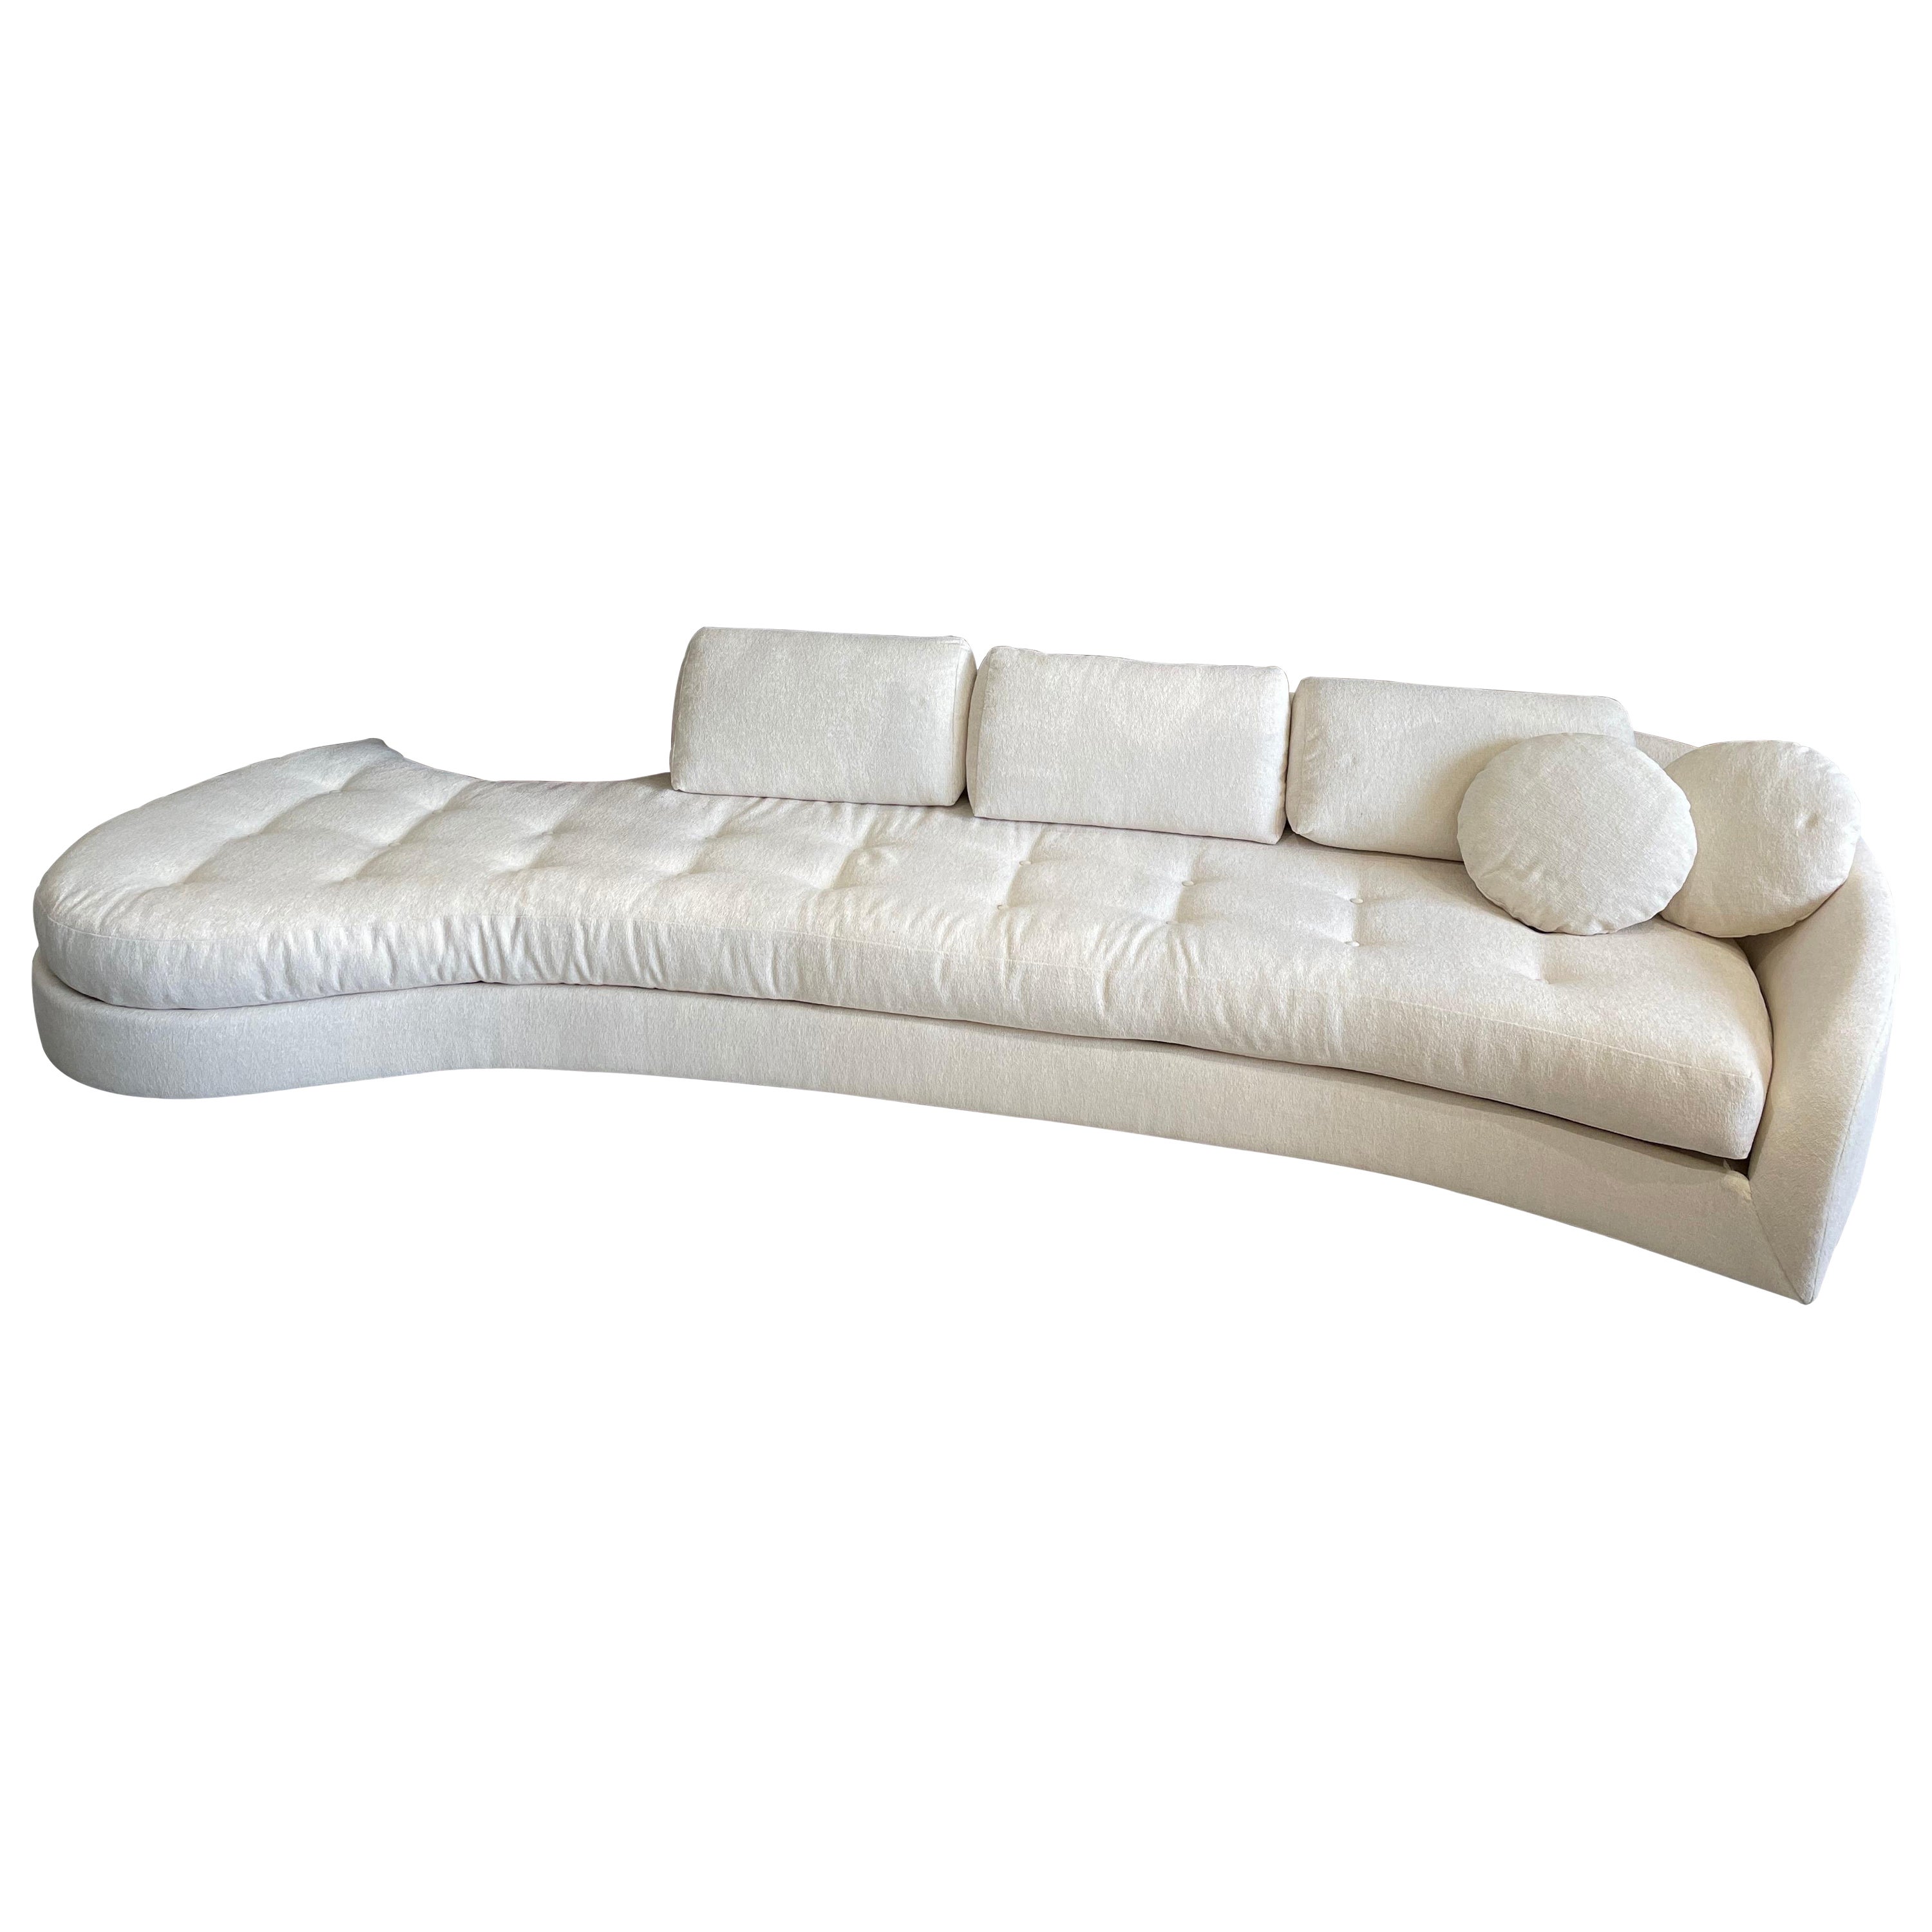 Cloud Sofa By Adrian Pearsall For, Adrian Pearsall Sofa Cloud